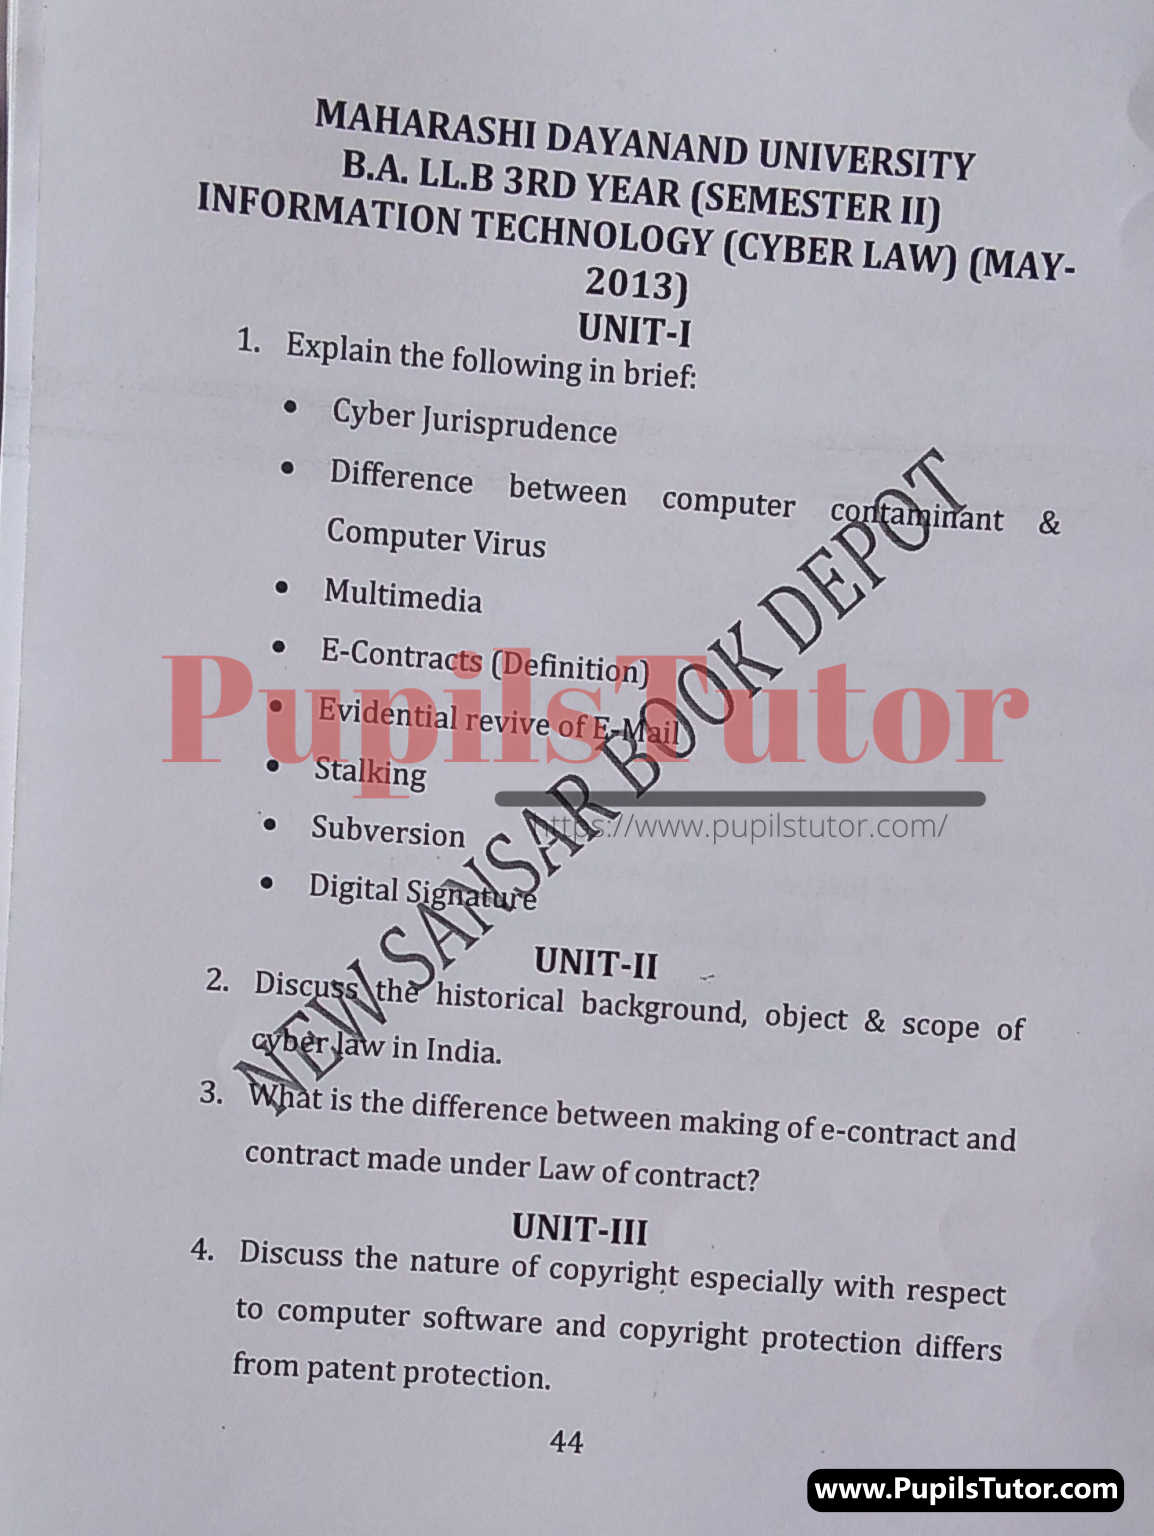 MDU (Maharshi Dayanand University, Rohtak Haryana) LLB Regular Exam (Hons.) Second Semester Previous Year Information Technology (Cyber Law) Question Paper For May, 2013 Exam (Question Paper Page 1) - pupilstutor.com